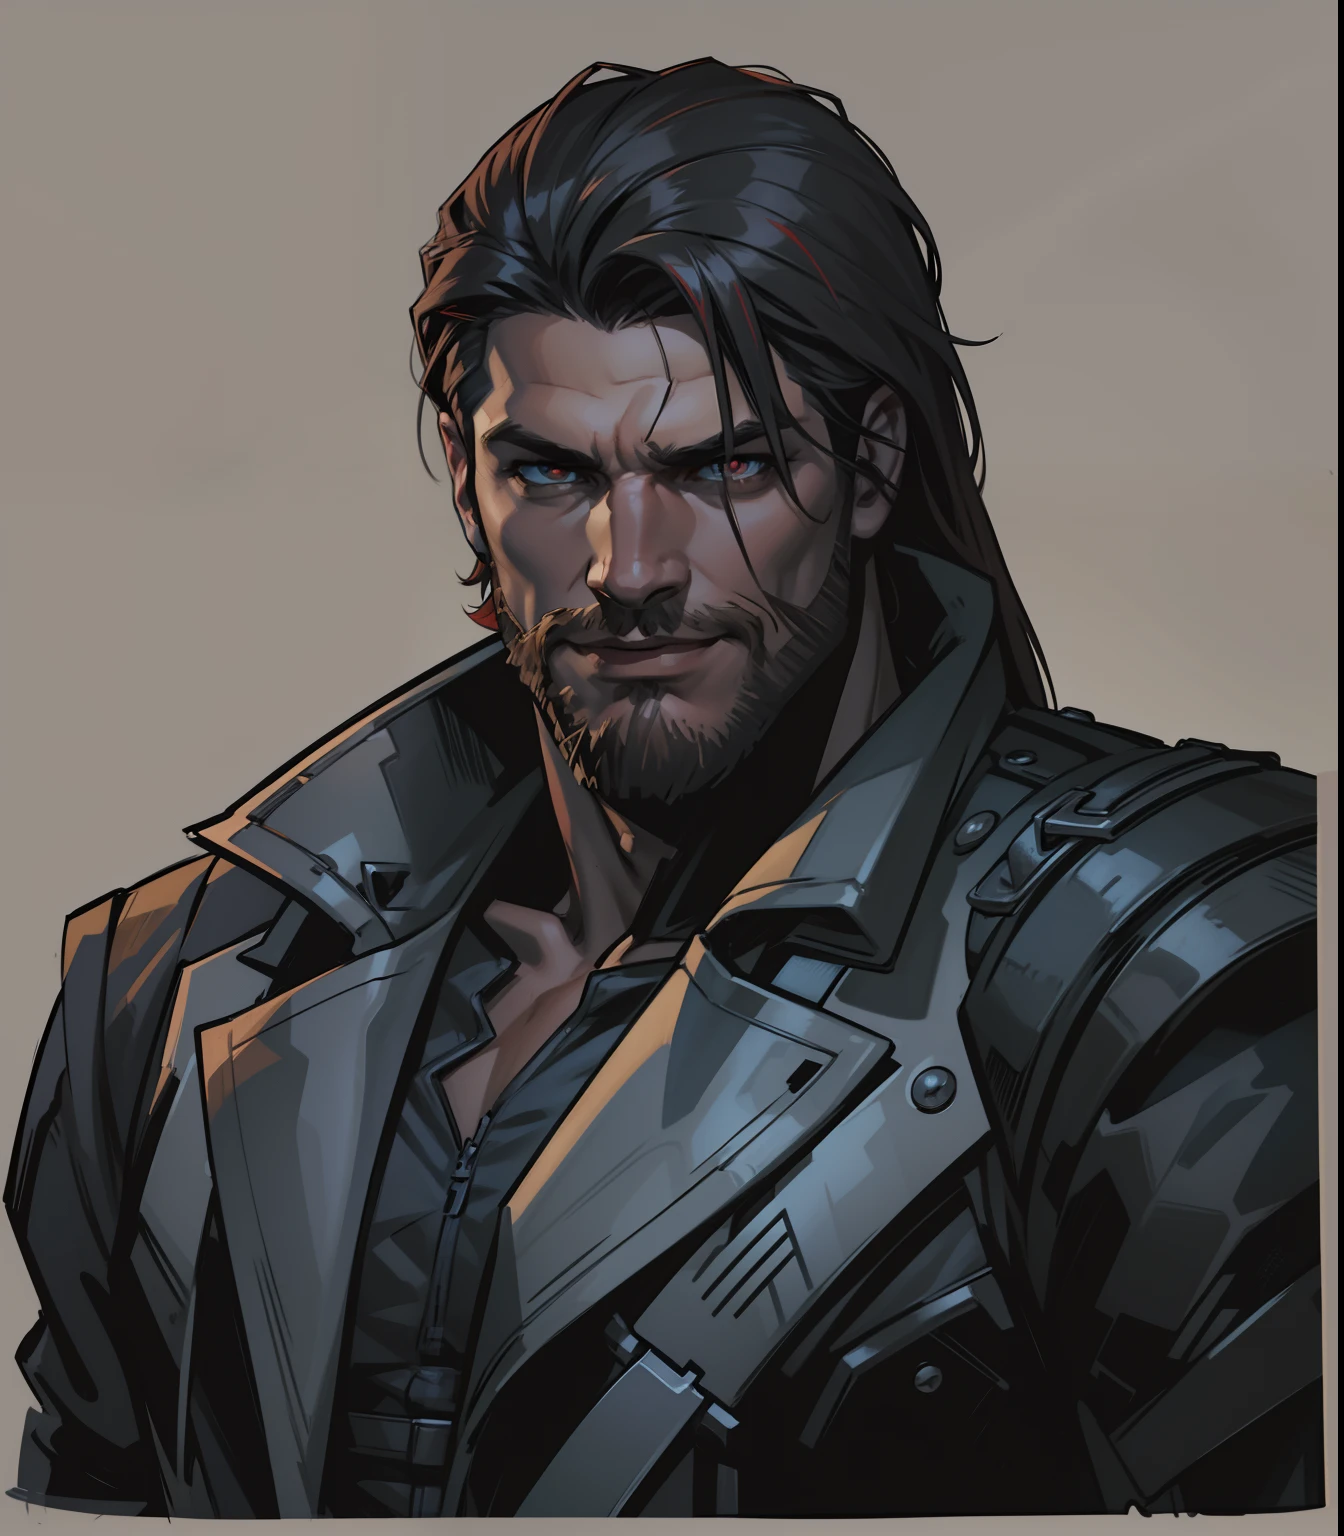 Marvel comics style. A close up portrait of a Todd Smith as Ares god, with mullet hair and a short beard. Trending on ArtStation, athlete, handsome, defined face, detailed eyes, short beard, glowing red eyes, brown-grey hair, cruel smile, badass, dangerous. Wearing trench overcoat and casual shirt.